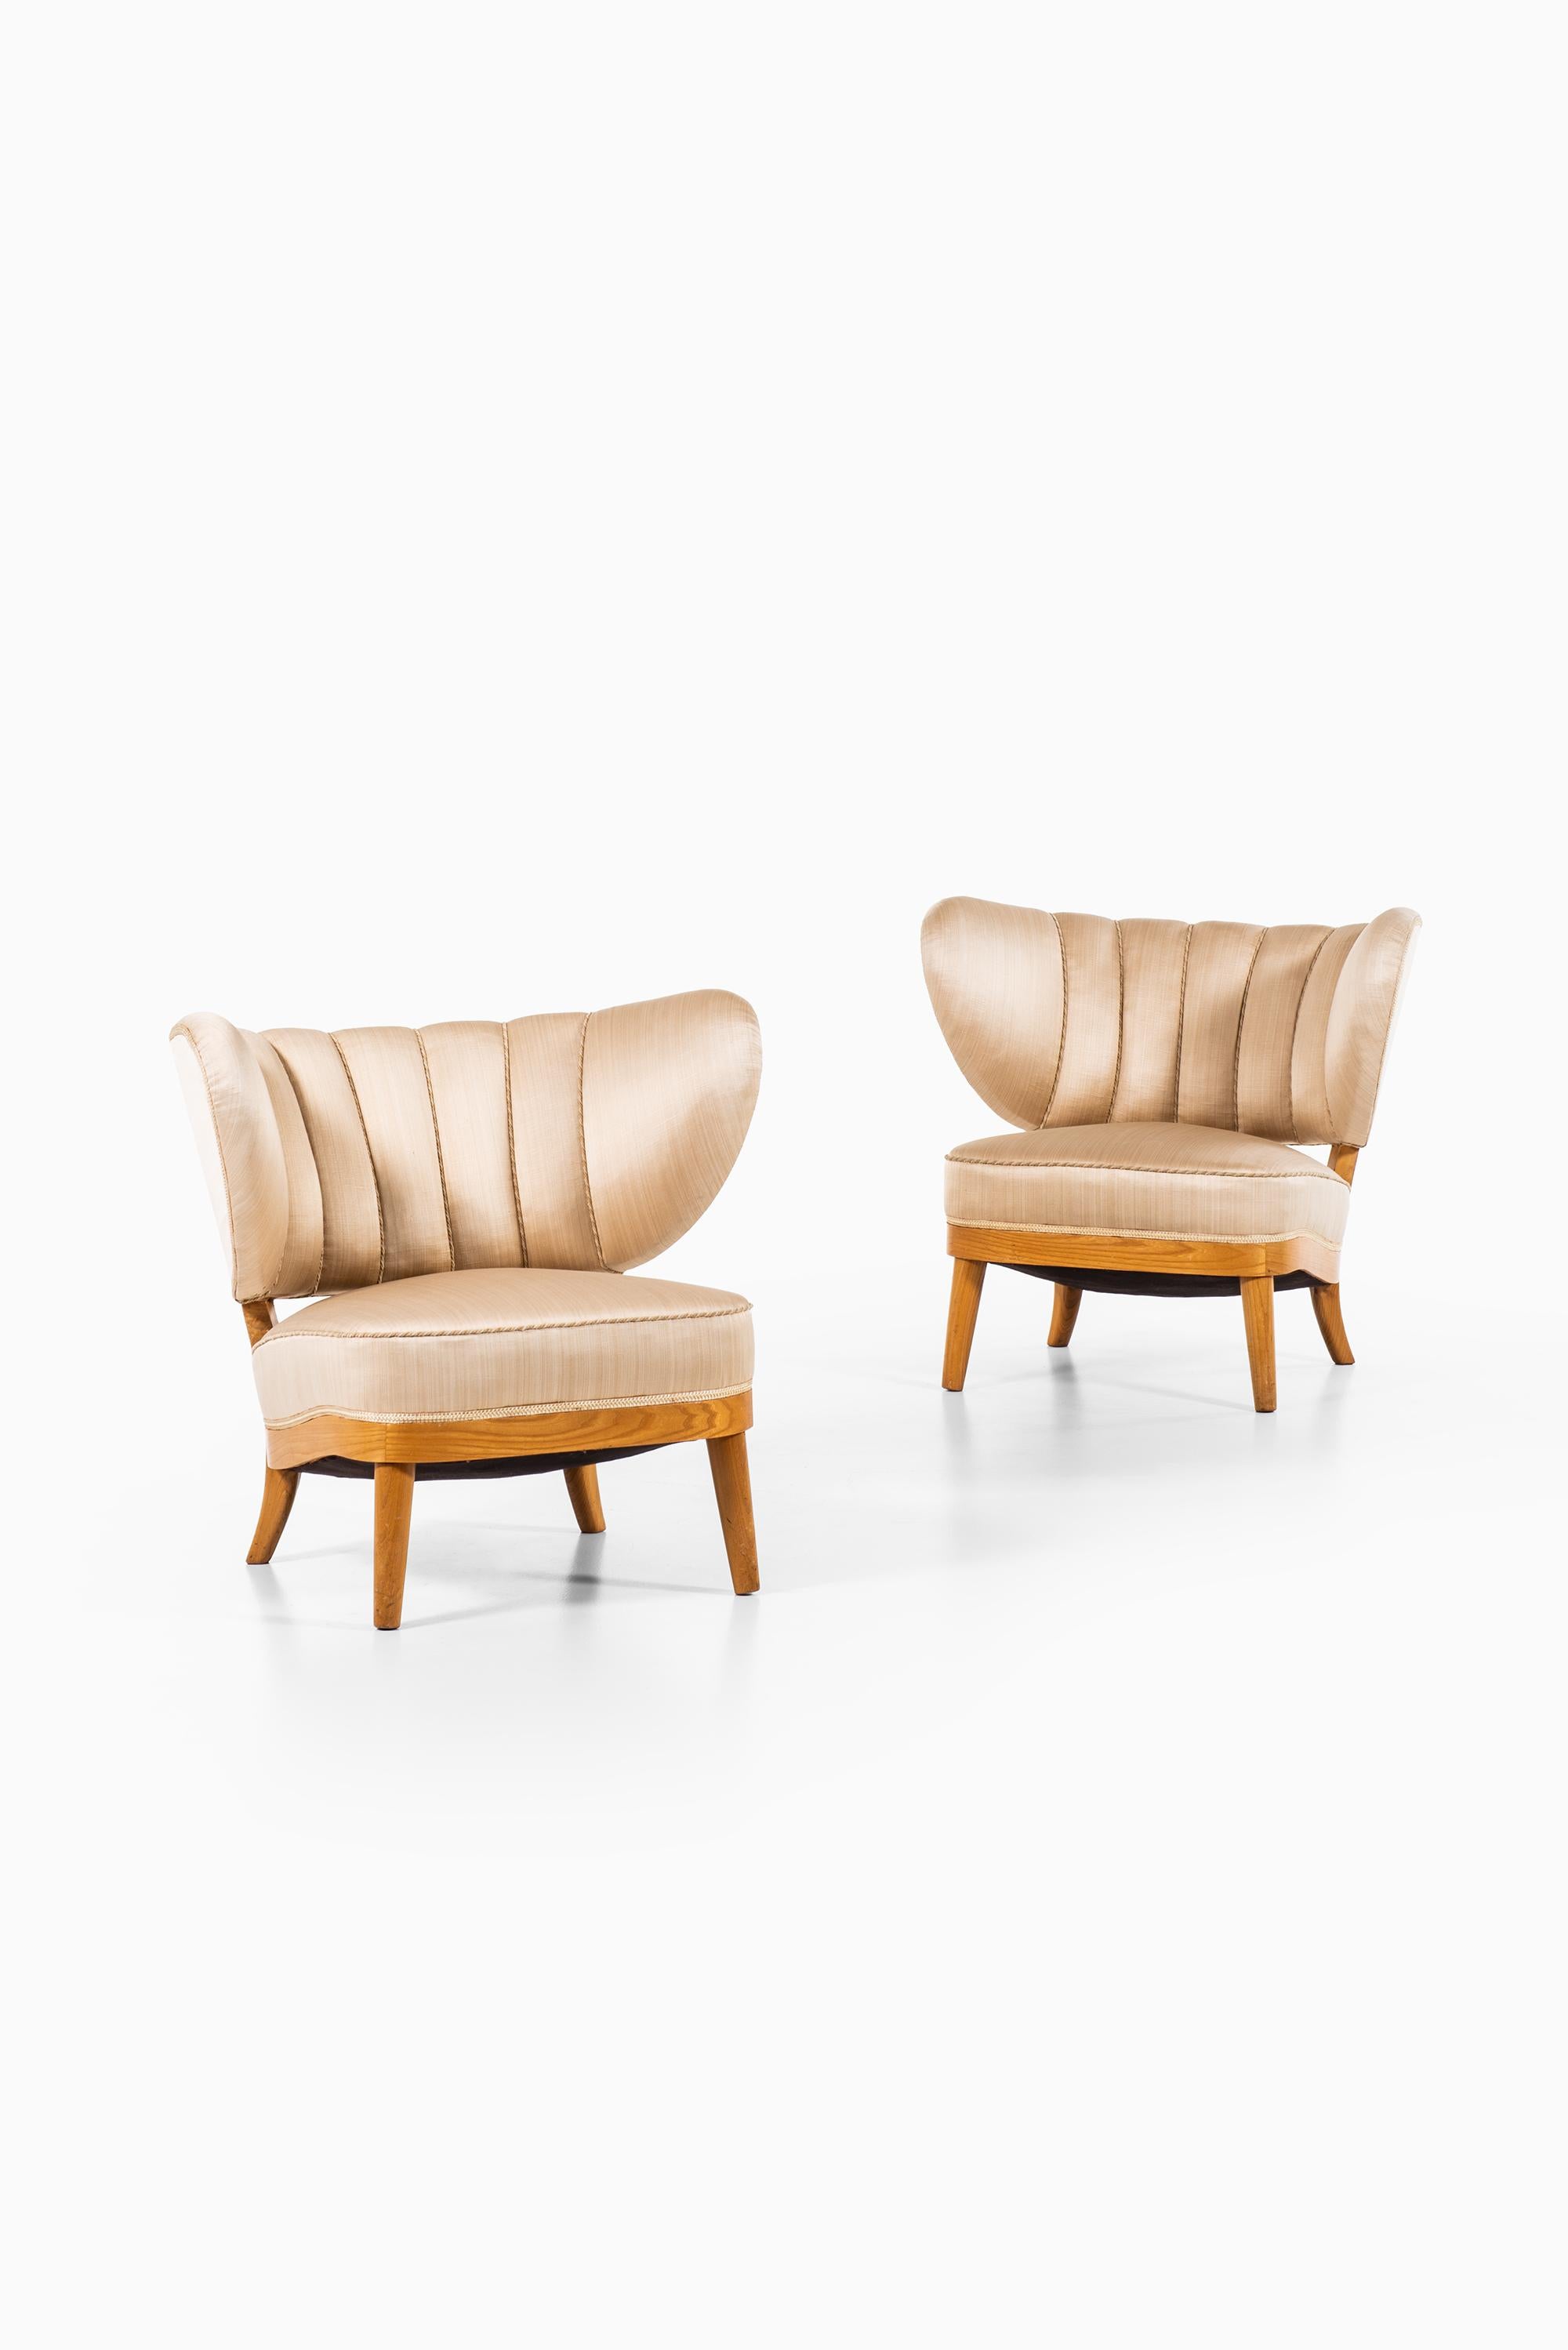 Mid-20th Century Otto Schulz Easy Chairs Produced by Boet in Sweden